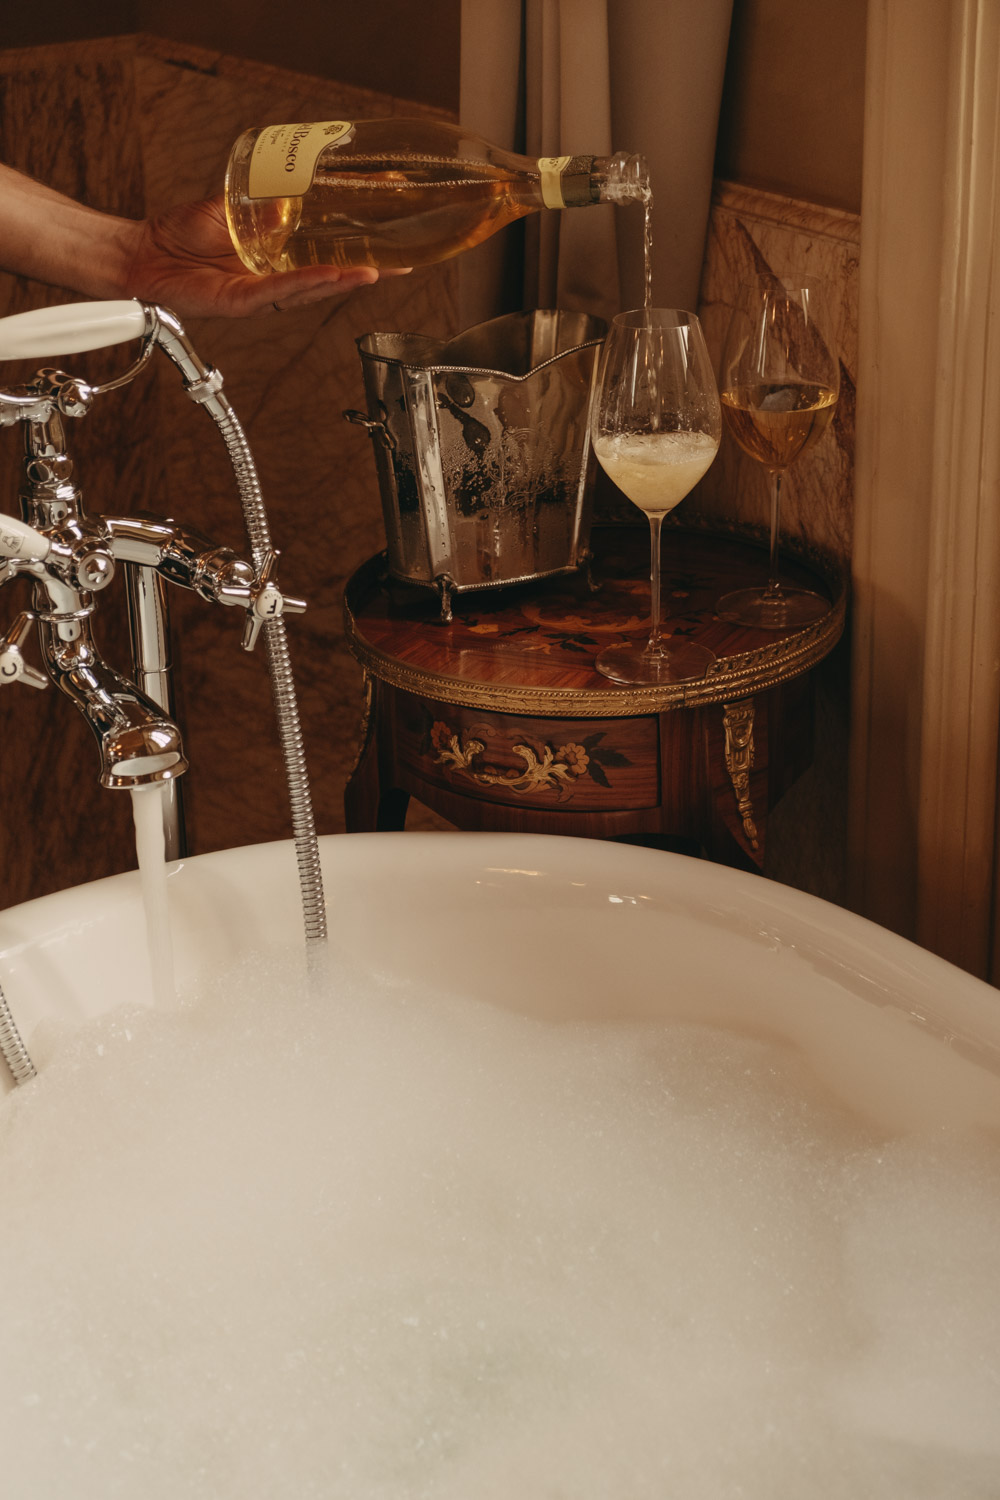 bubble bath and champagne being poured at passalacqua